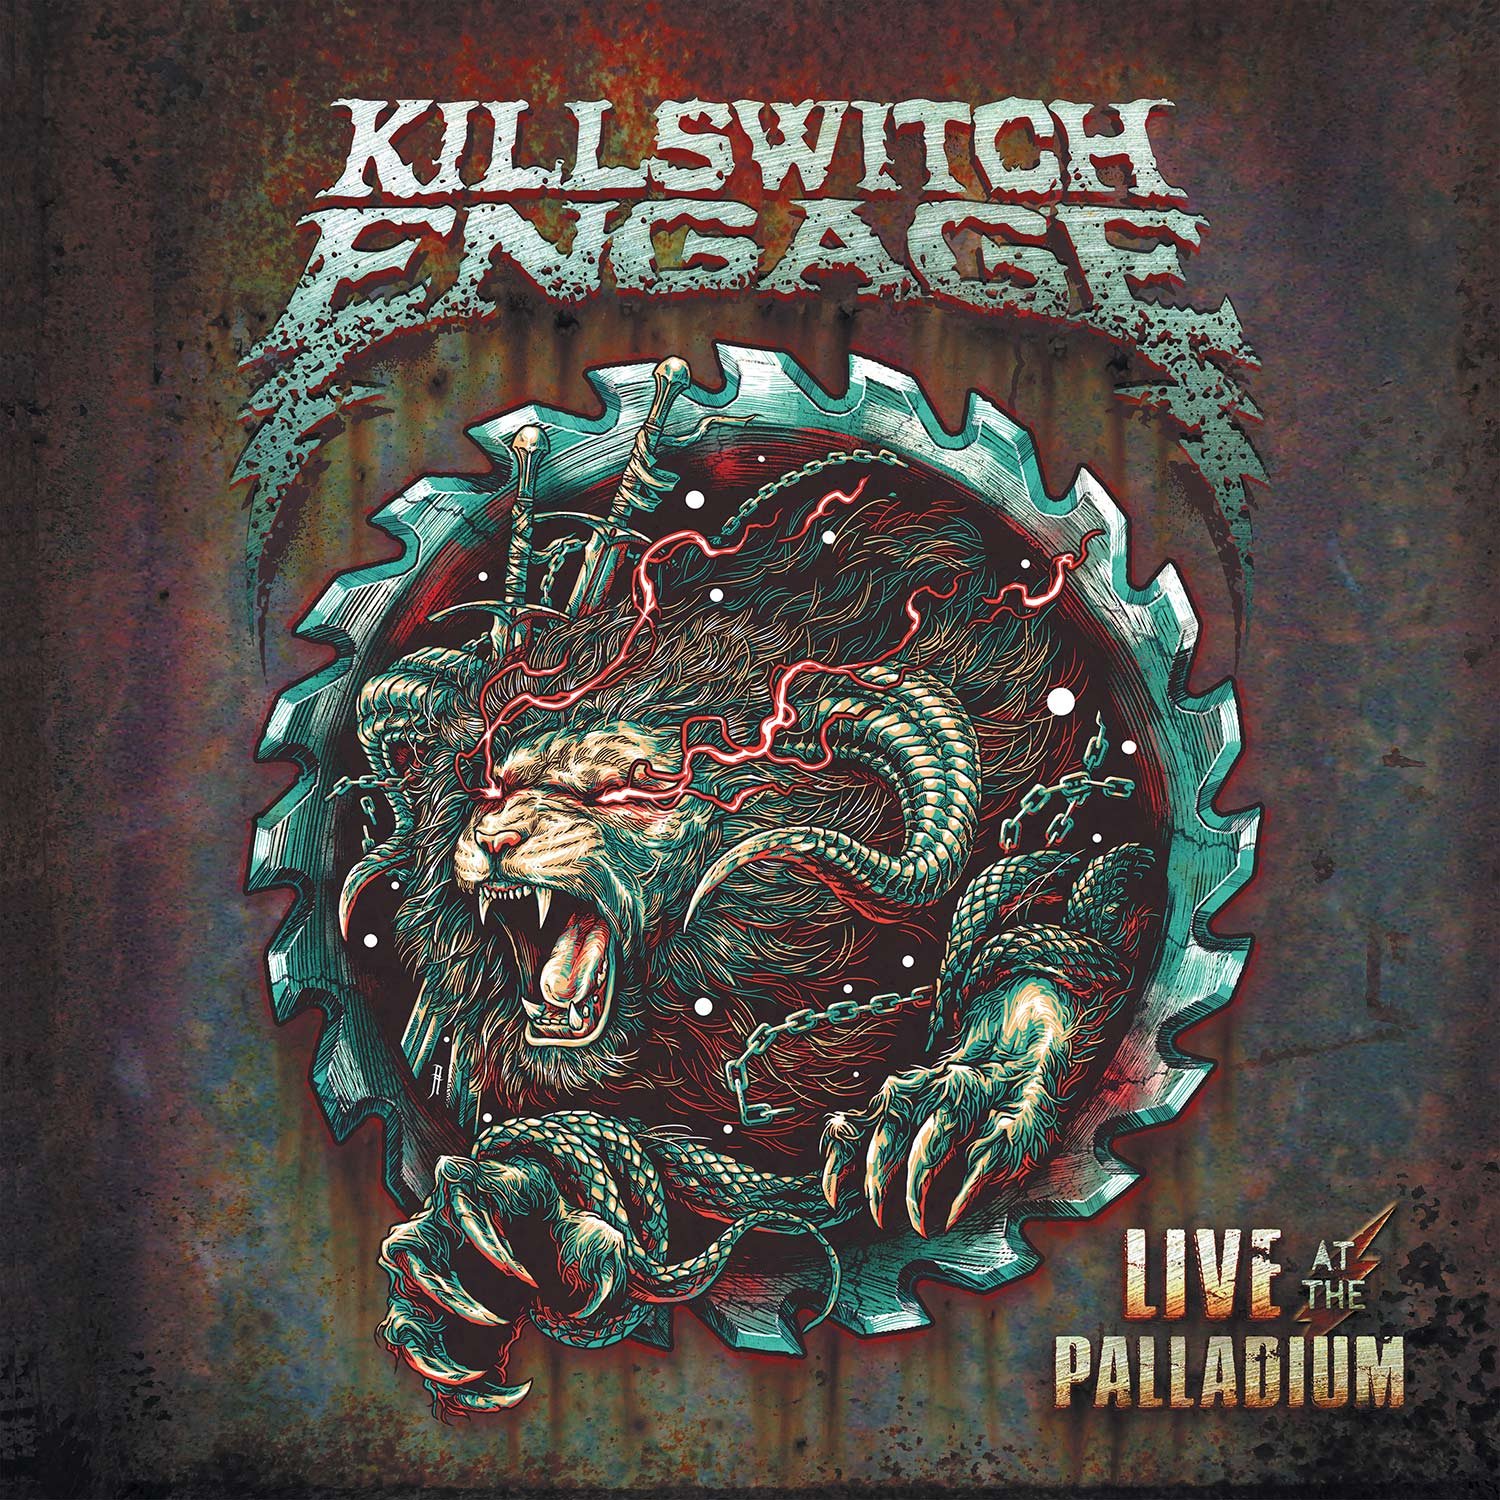 Killswitch Engage-Live At The Palladium-(3984-16008-2)-2CD-FLAC-2022-WRE